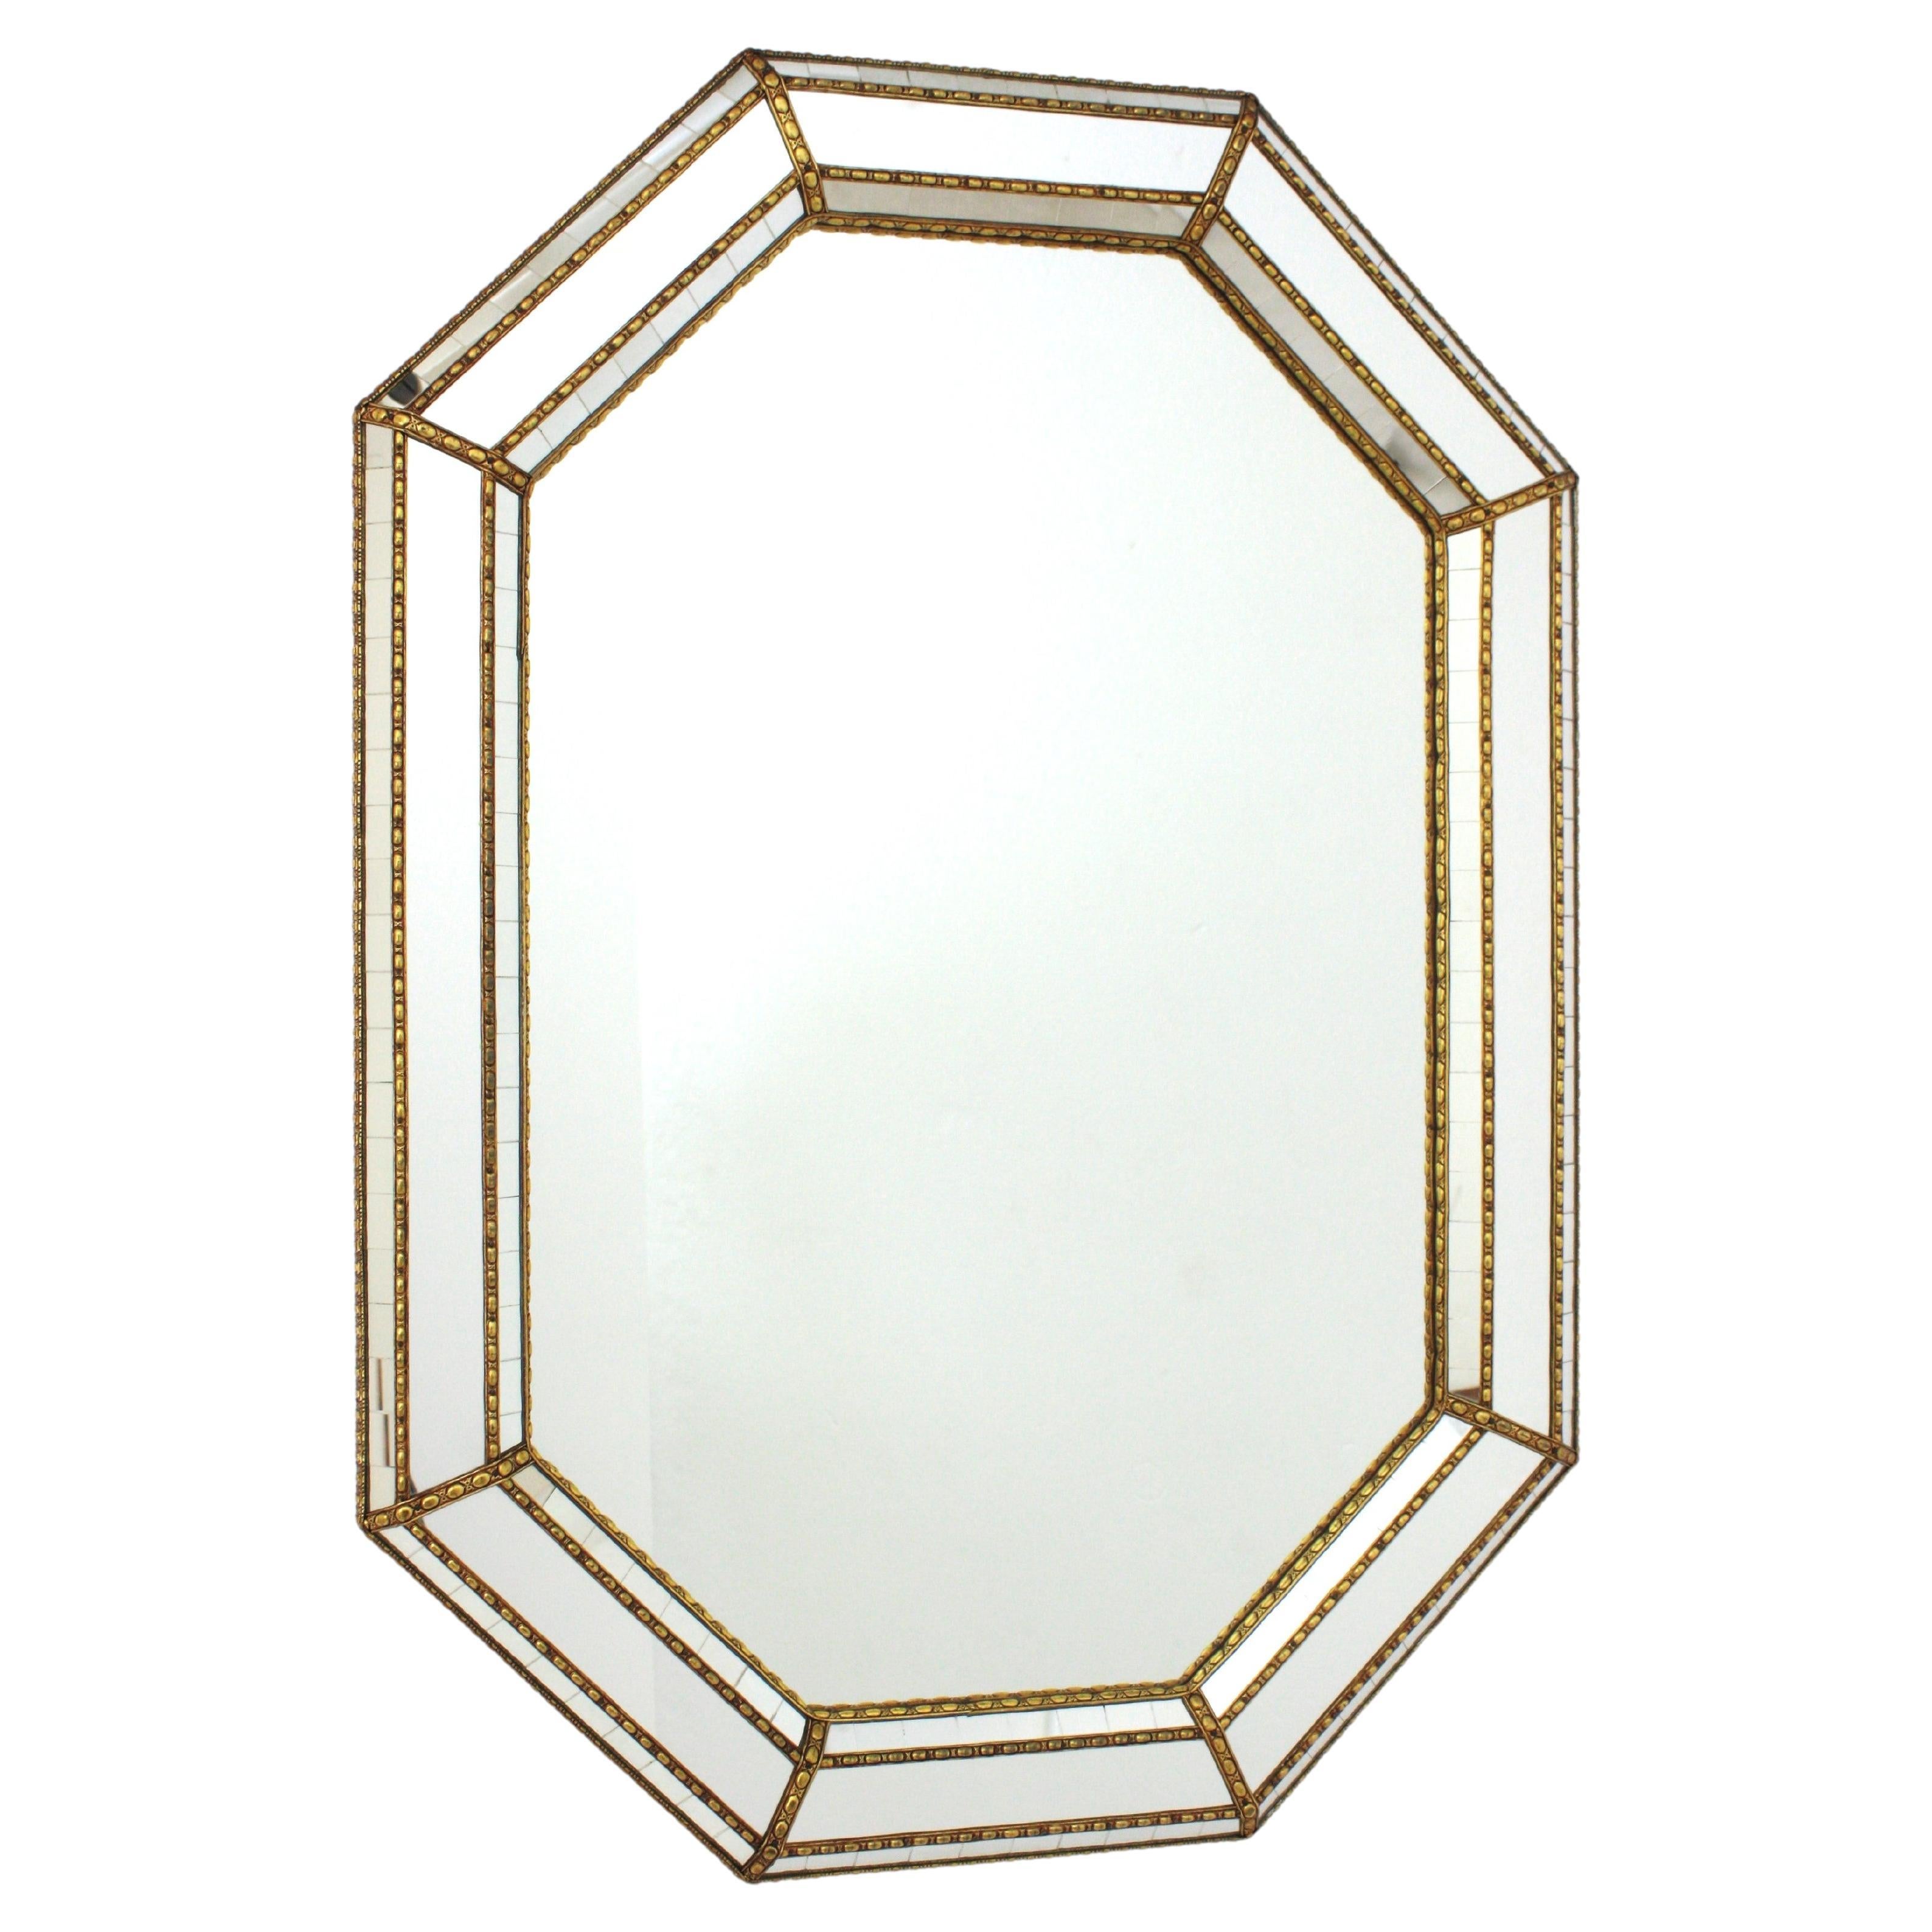 Venetian Modern Octagonal Wall Mirror with Brass Frame
Venetian style octagonal wall mirror with gilt metal accents, Spain, 1960s
This octagonal mirror has a triple mirror frame. Two tiers of mosaic small mirror pieces and a central layer of larger